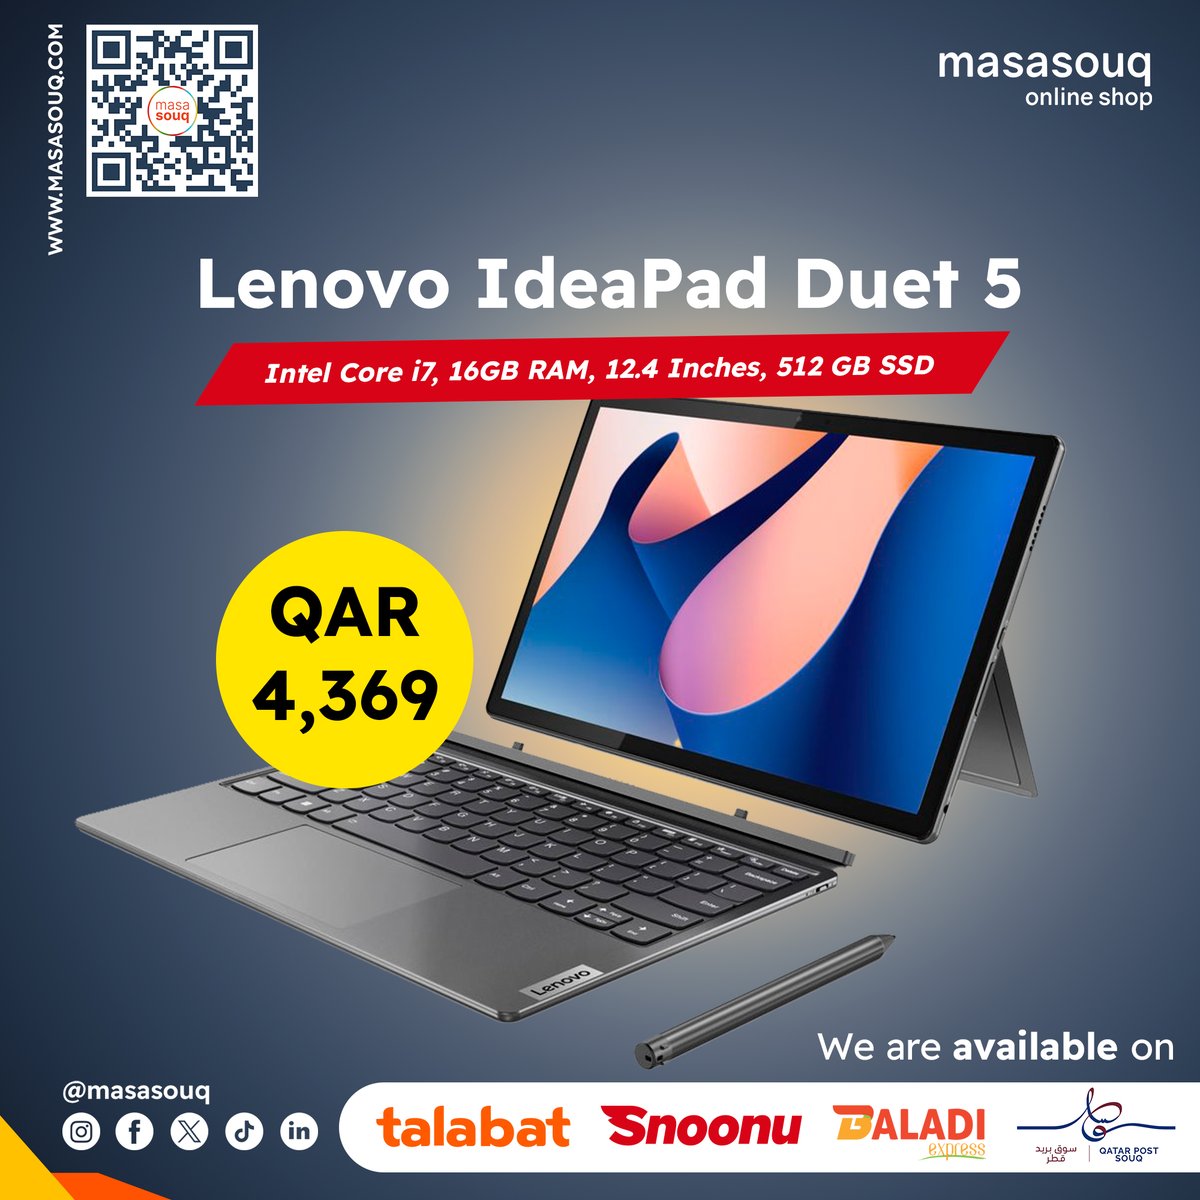 Get the ultimate 2-in-1 experience! The Lenovo IdeaPad Duet 5 packs powerful Intel Core i7, 16GB RAM, and a spacious 512GB SSD.  Perfect for work AND play!  💻🎮 masasouq.com/lenovo-ideapad…  :QAR4,369
#Lenovo #IdeaPadDuet5 #laptopgoals #techlover #productivity #masasouq